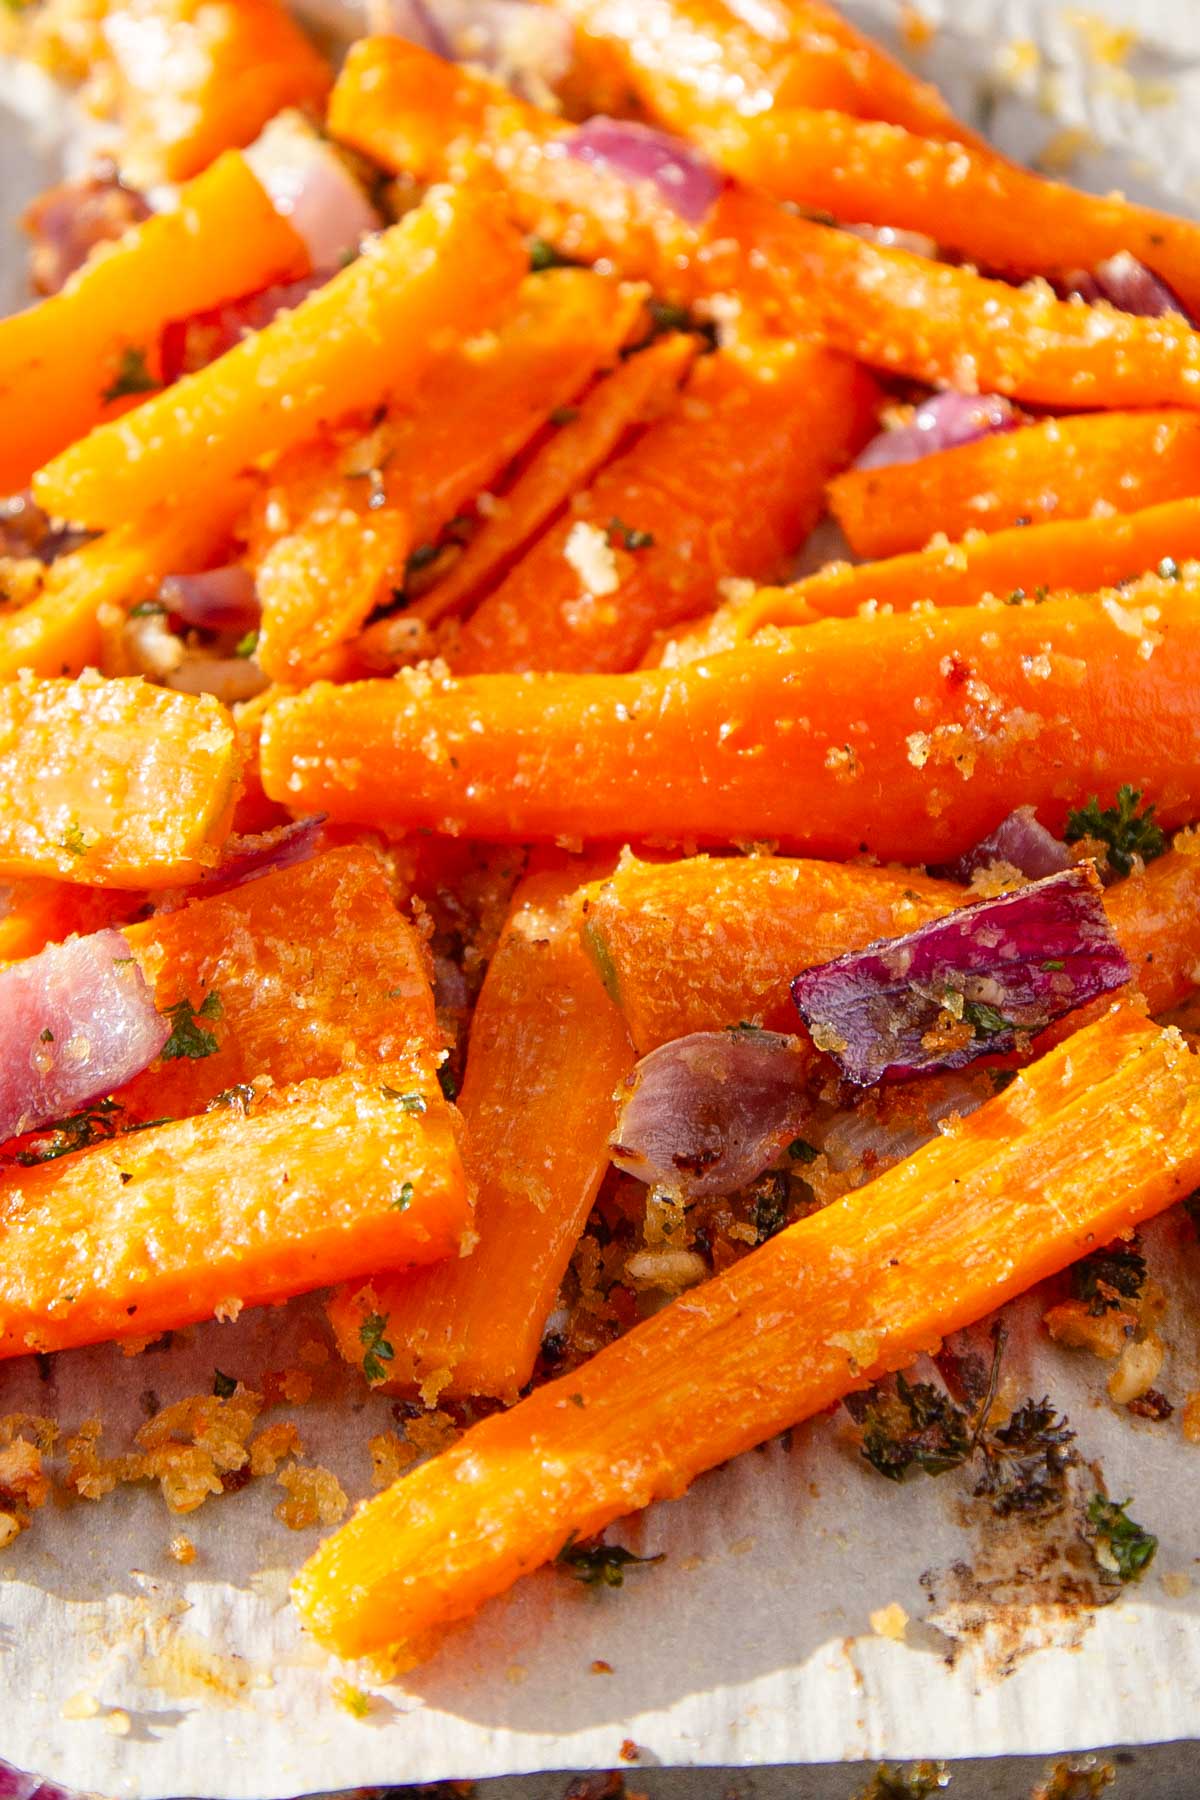 Pan roasted carrots with red onions, parsley and breadcrumbs.